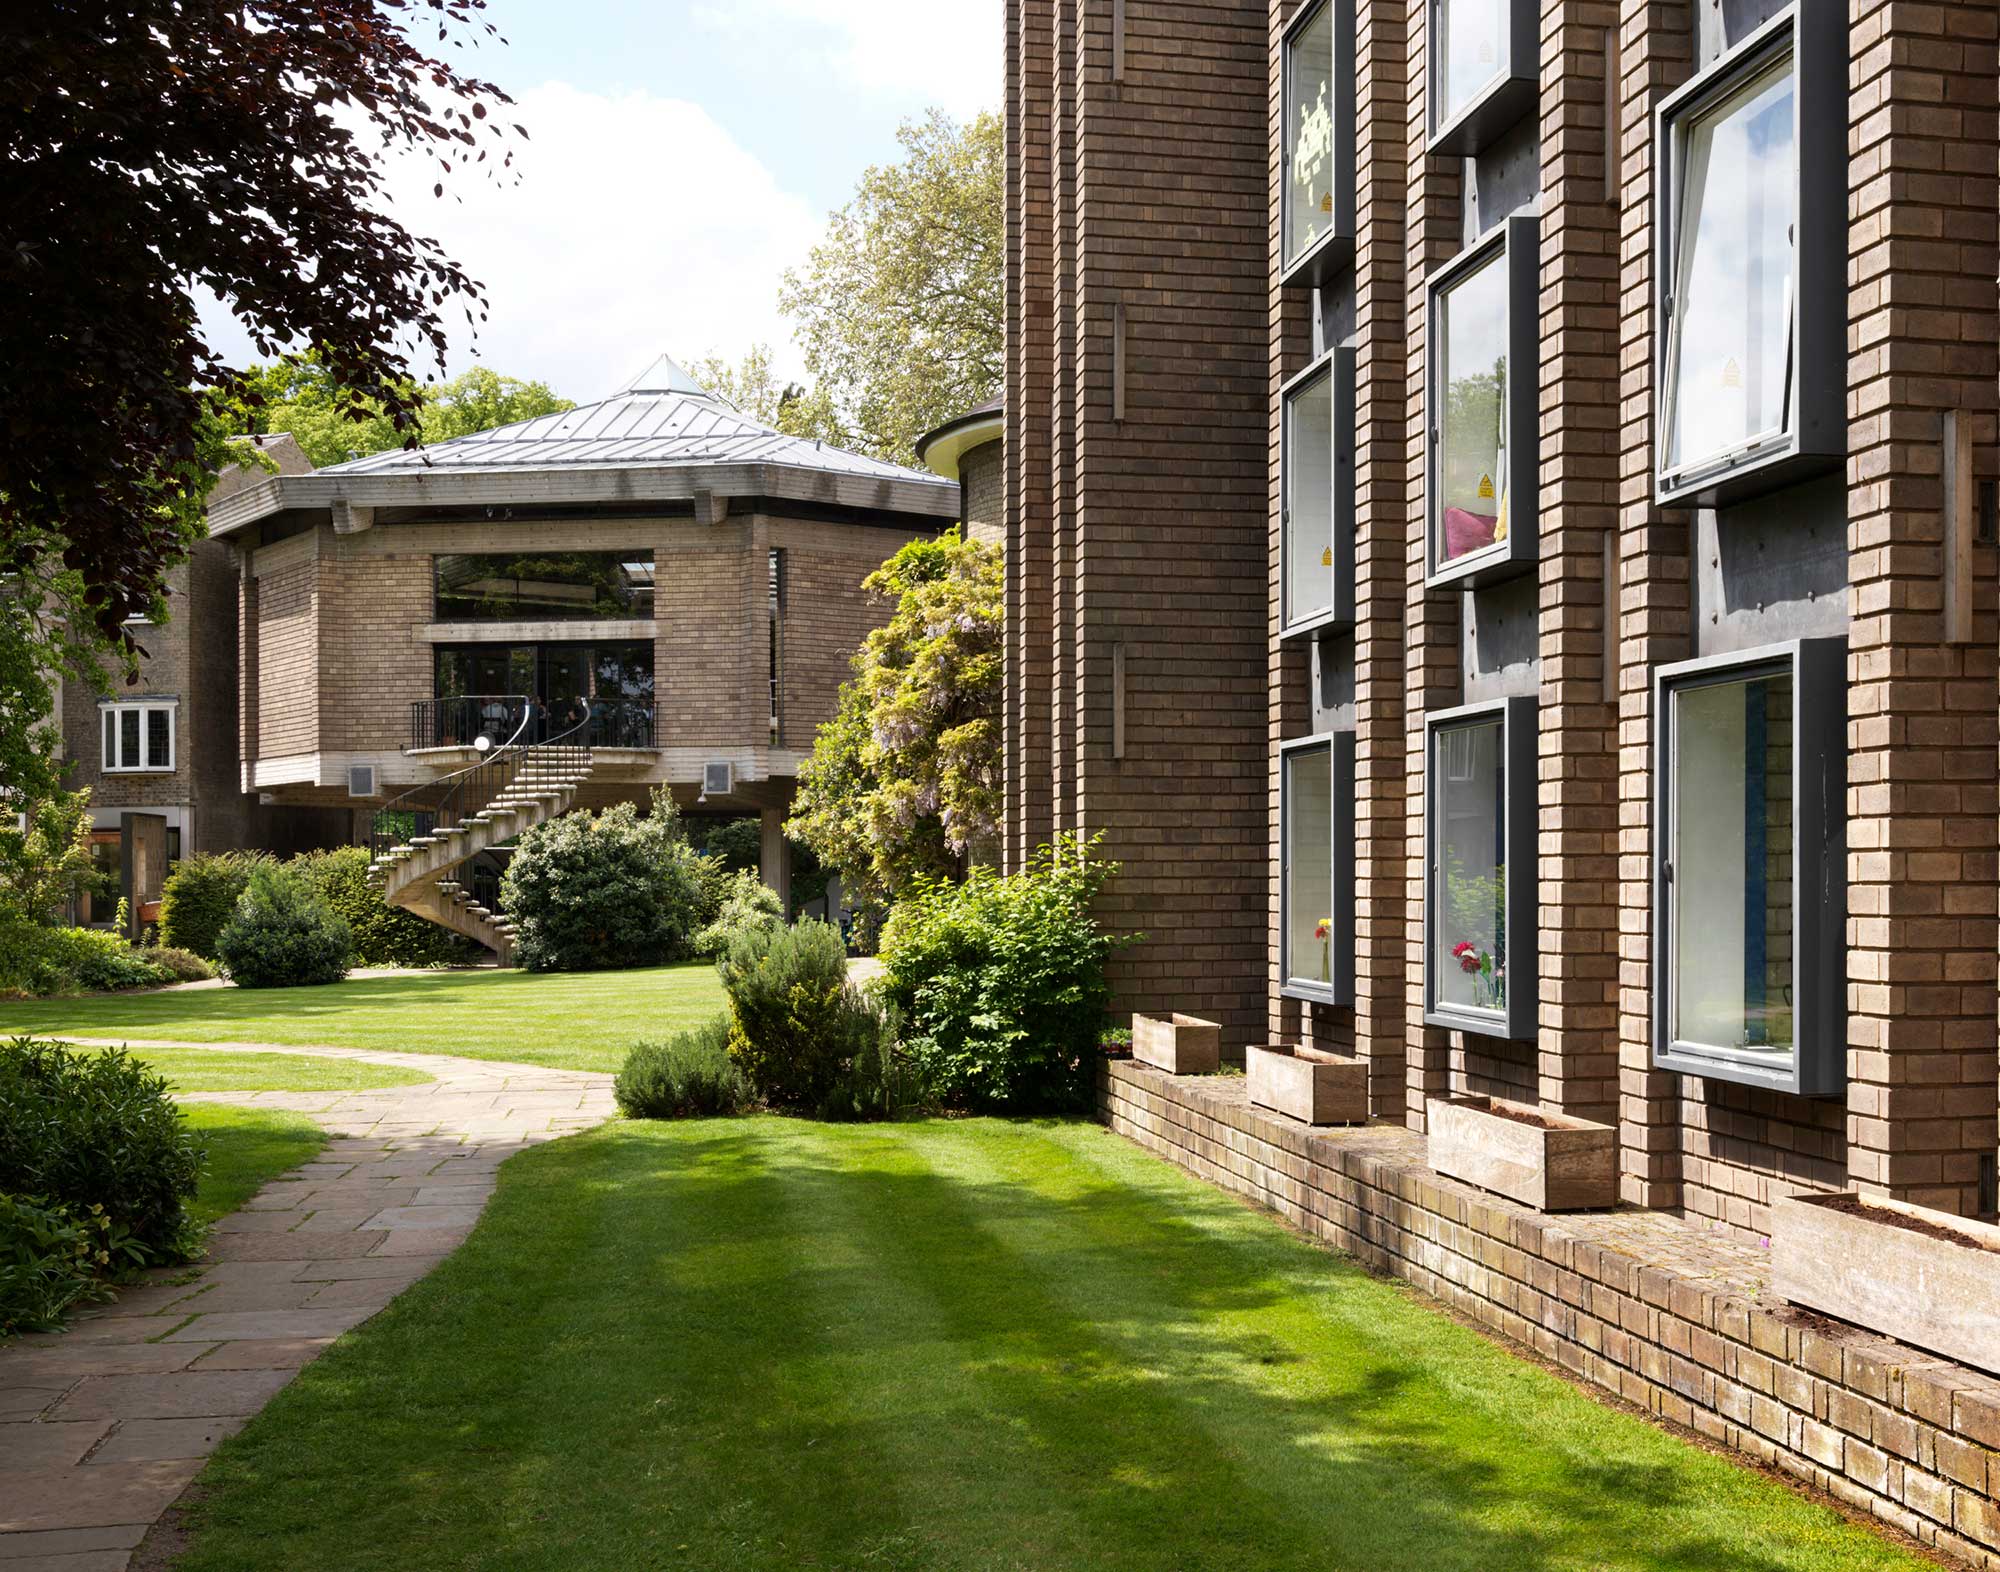 Exterior view of the Rayne building, halls of residence at Darwin College, Cambridge, with the Dining Hall in the background